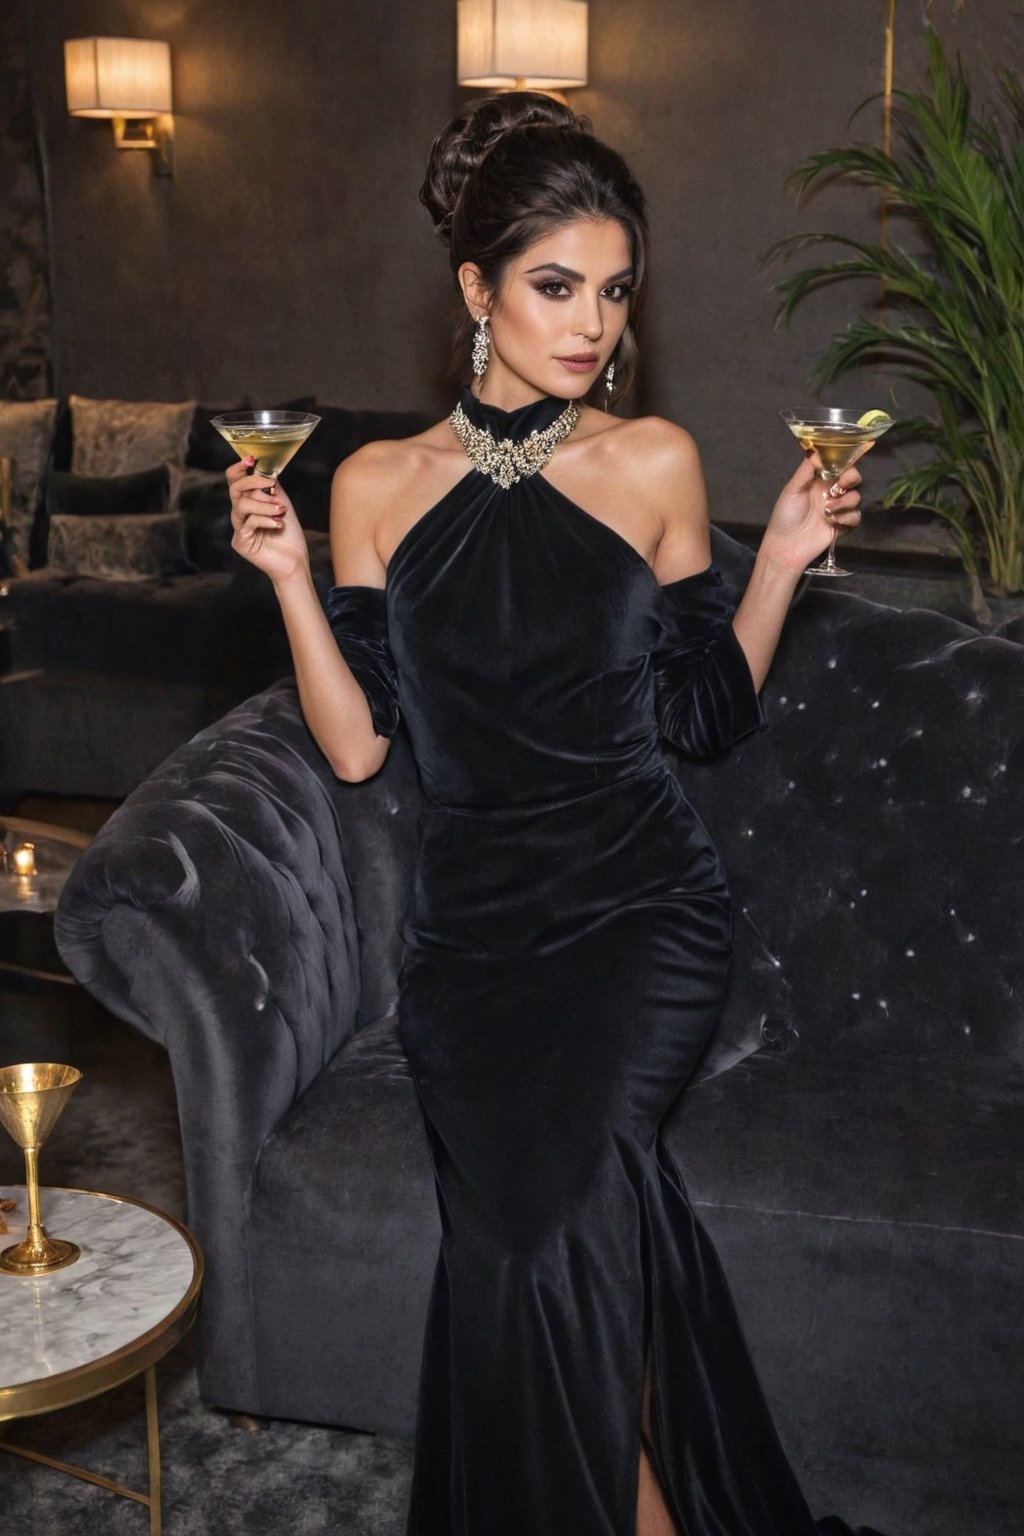 Generate hyper realistic image of an elegant Persian  with a sophisticated updo, smoky eyes, and a glamorous black evening gown, playfully sipping a martini in an upscale lounge with ambient lighting and plush velvet couches.